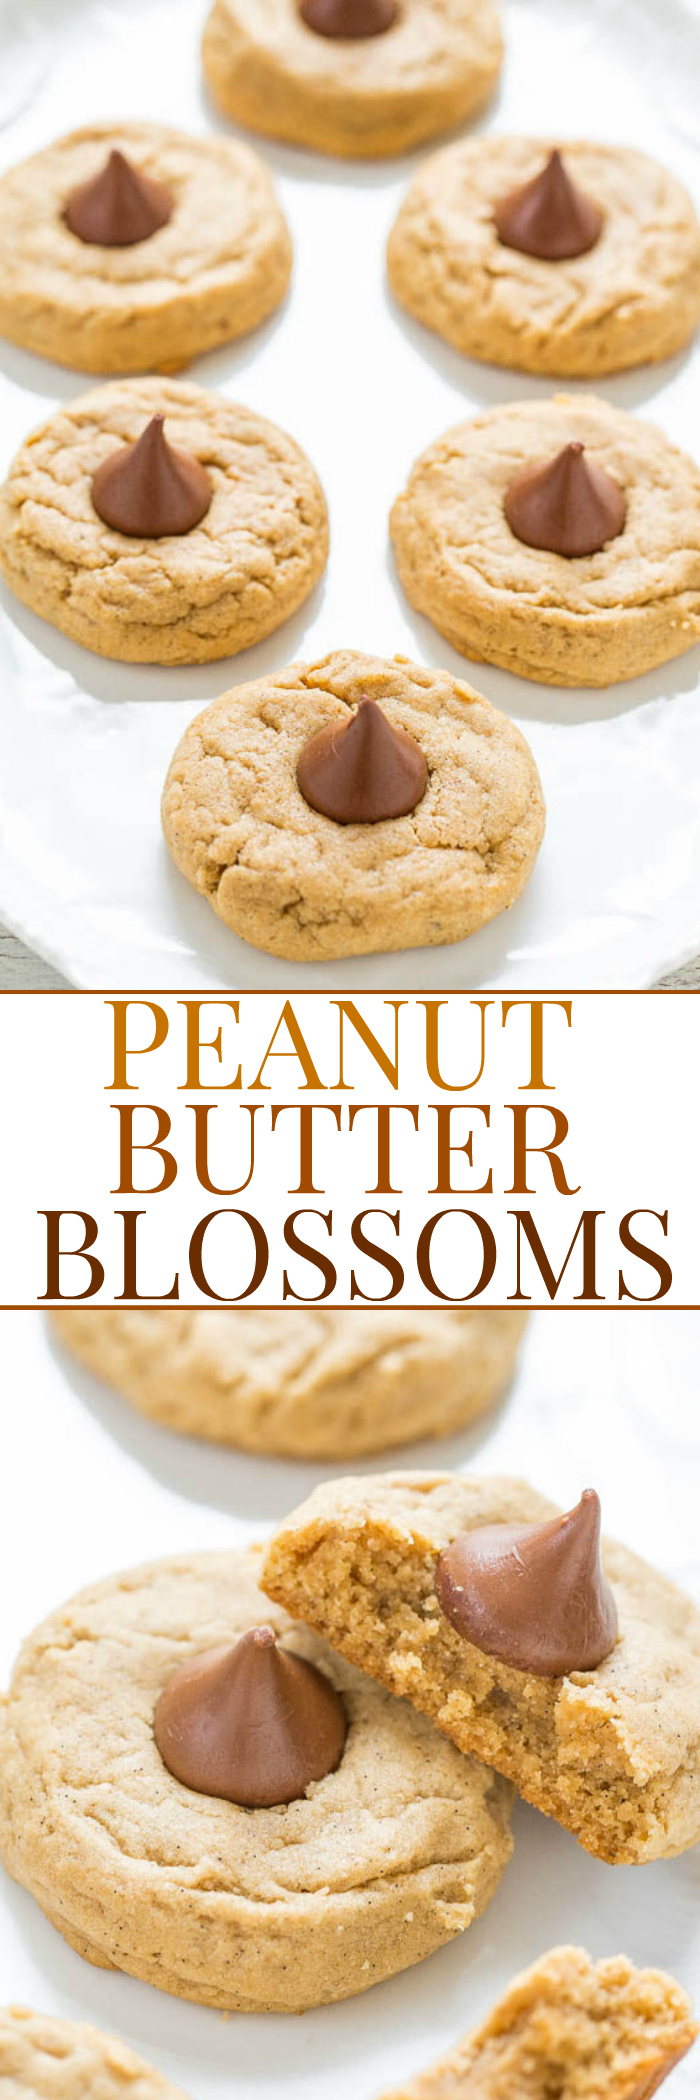 Peanut Butter Blossoms - A soft and chewy recipe for the classic cookie that STAYS SOFT!! Easy, full of rich peanut butter flavor, and topped with a Kiss! Always a cookie jar or cookie exchange favorite!!